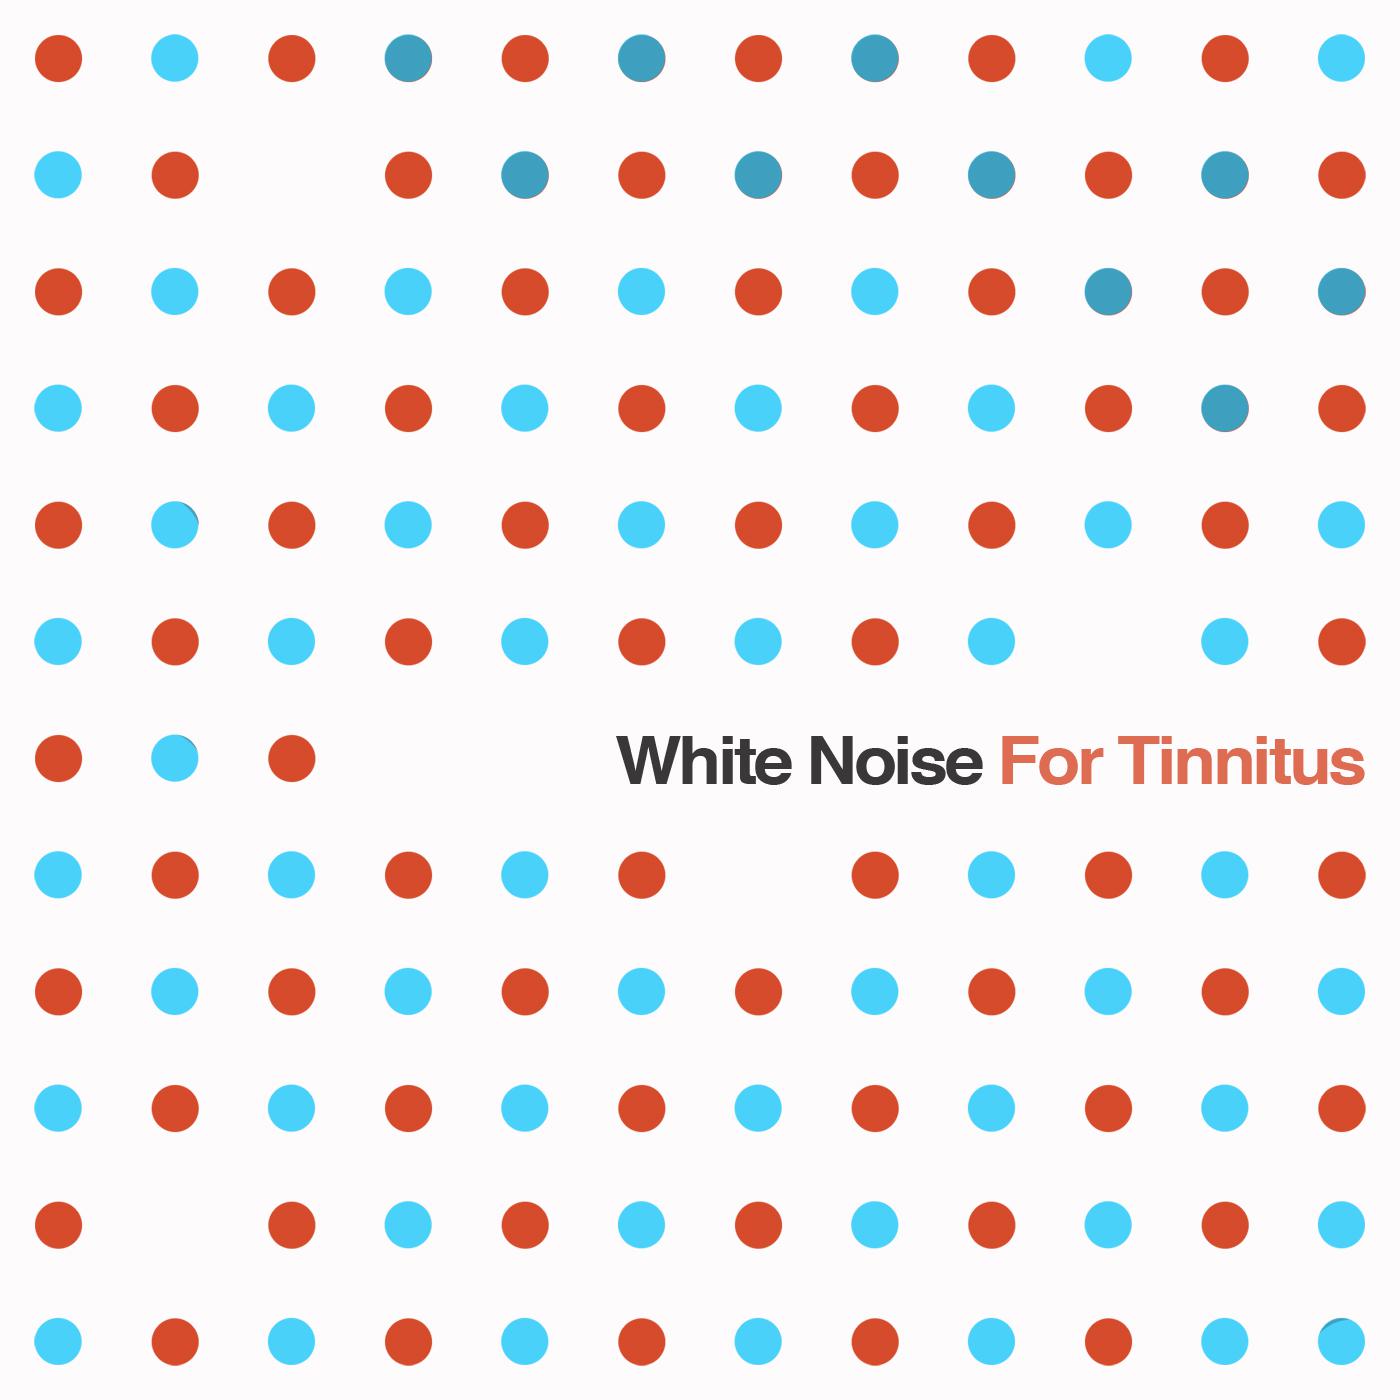 Pure White Noise (For One Hour With One Minute Fade Out)